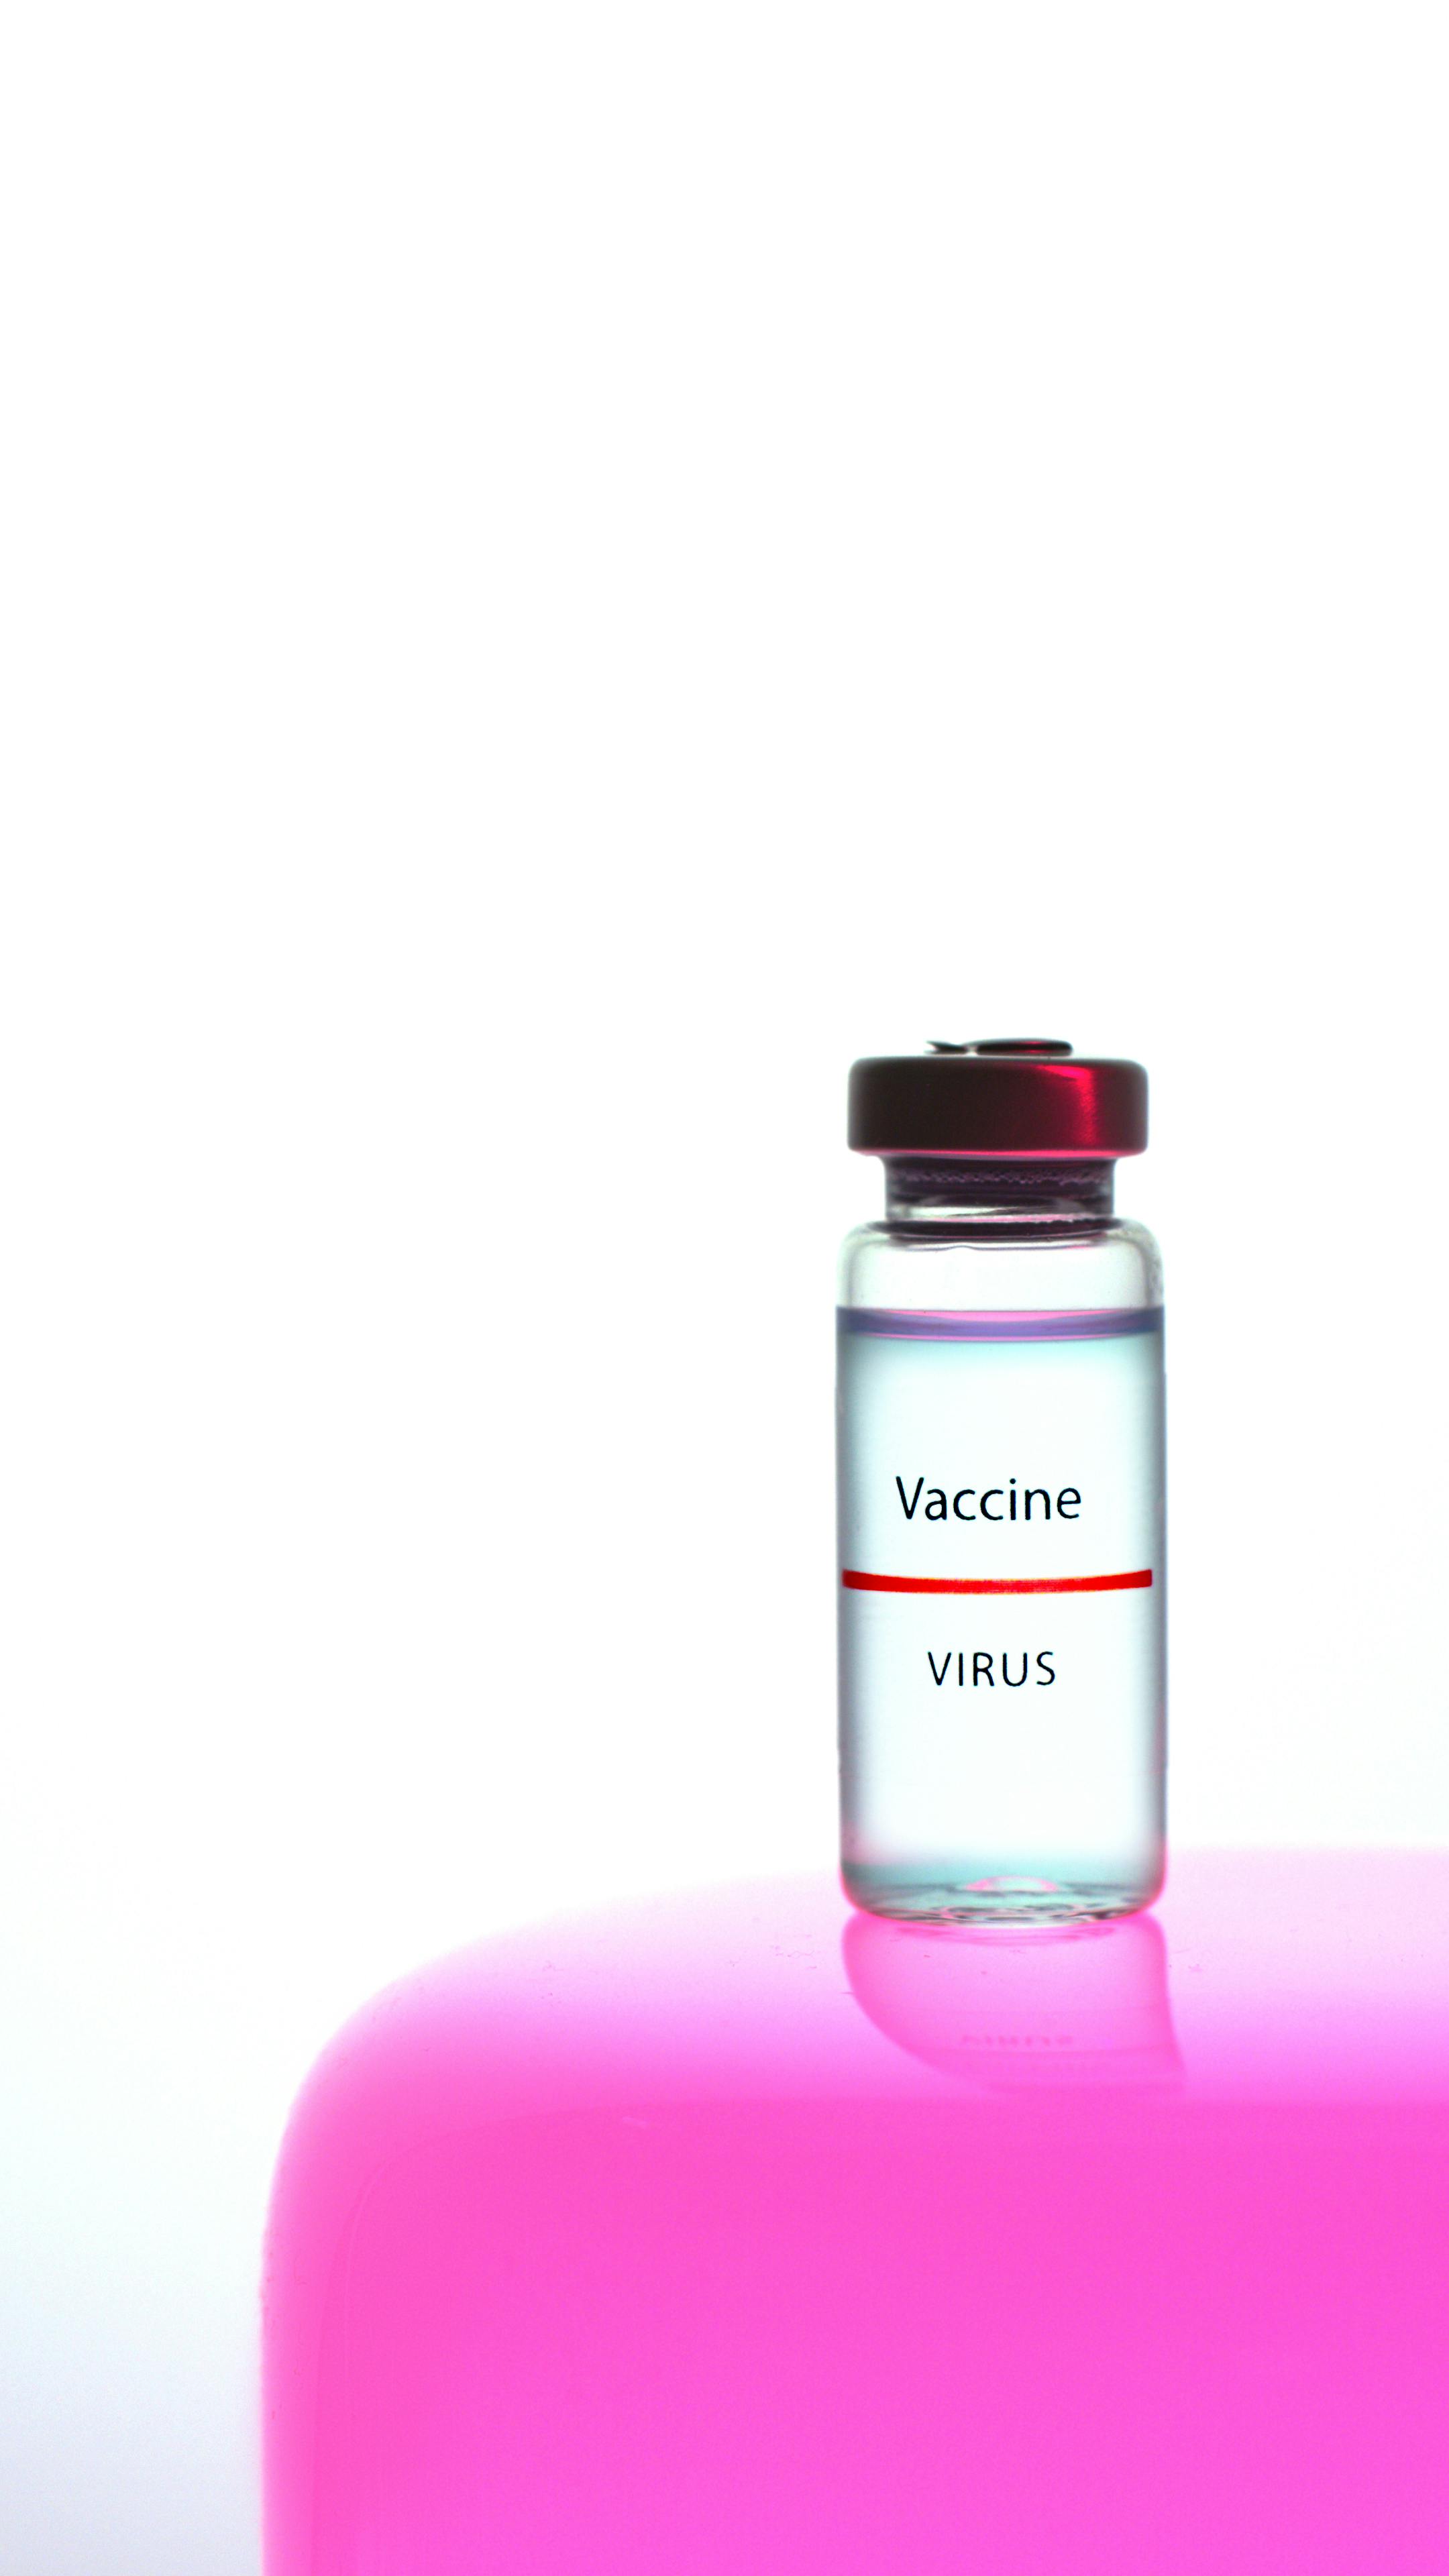 a vaccine vial on white background